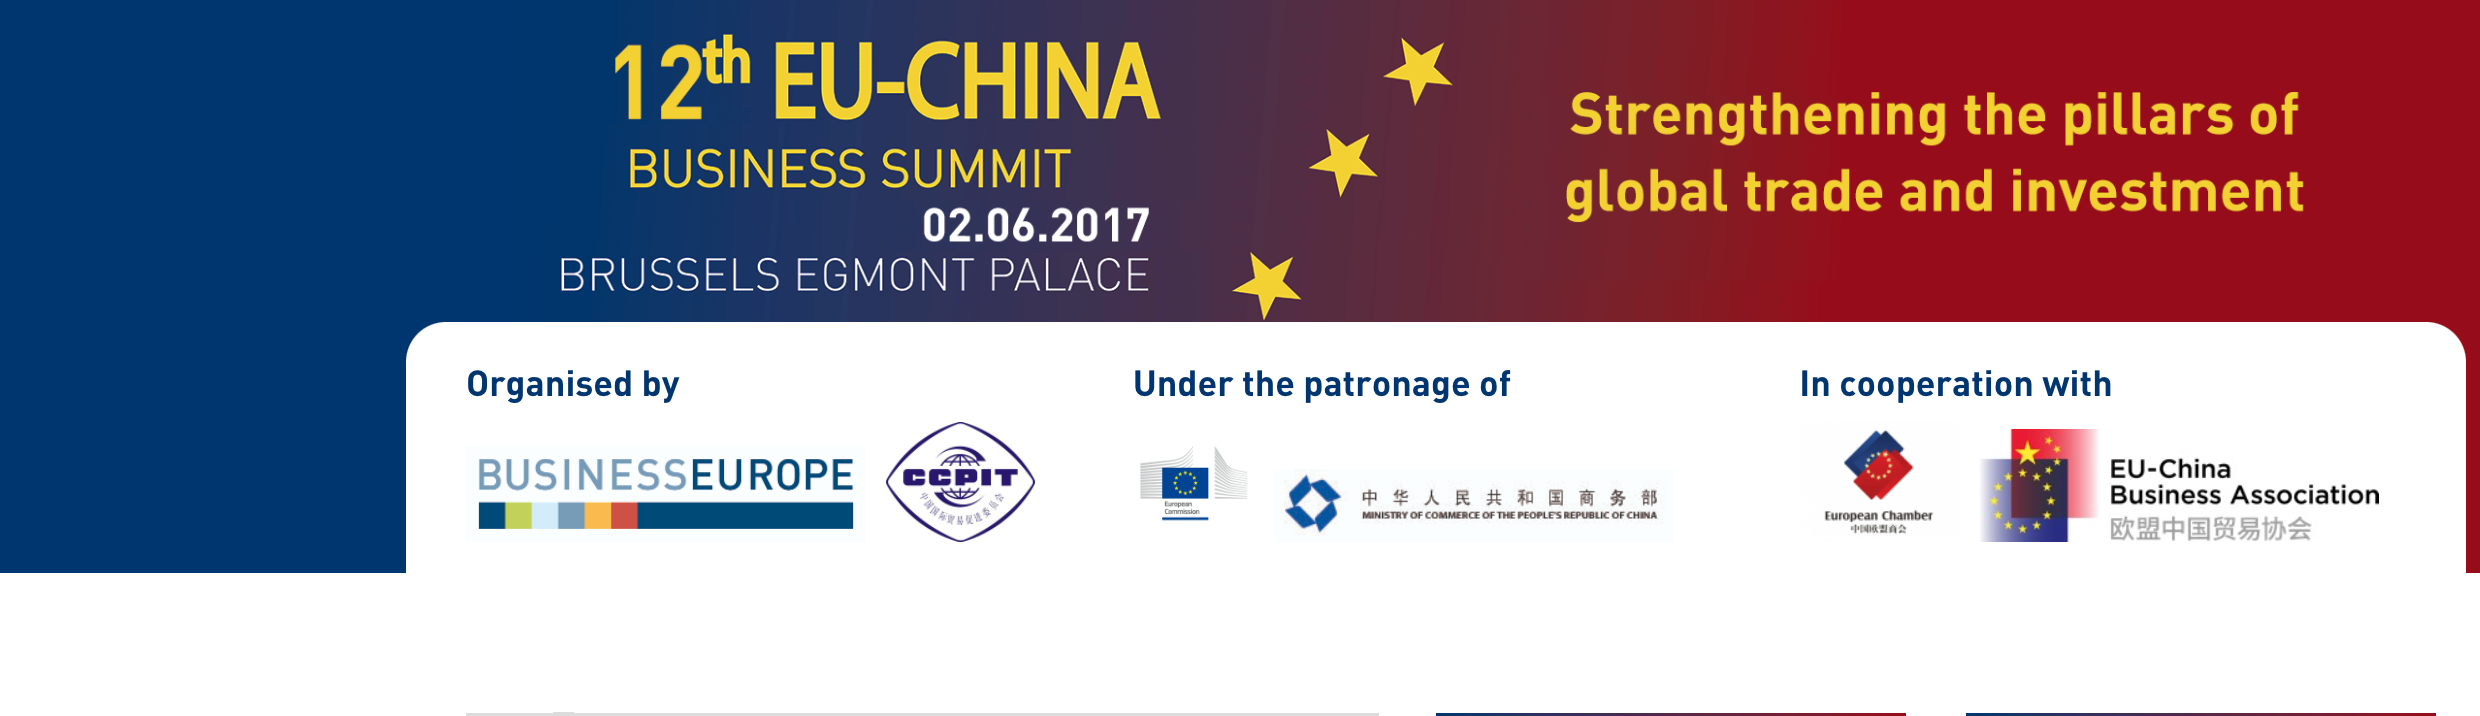 OUR CEO&DIRECTOR JARVOUS CHEN INVITED TO EU-CHINA BUSINESS SUMMIT 2017